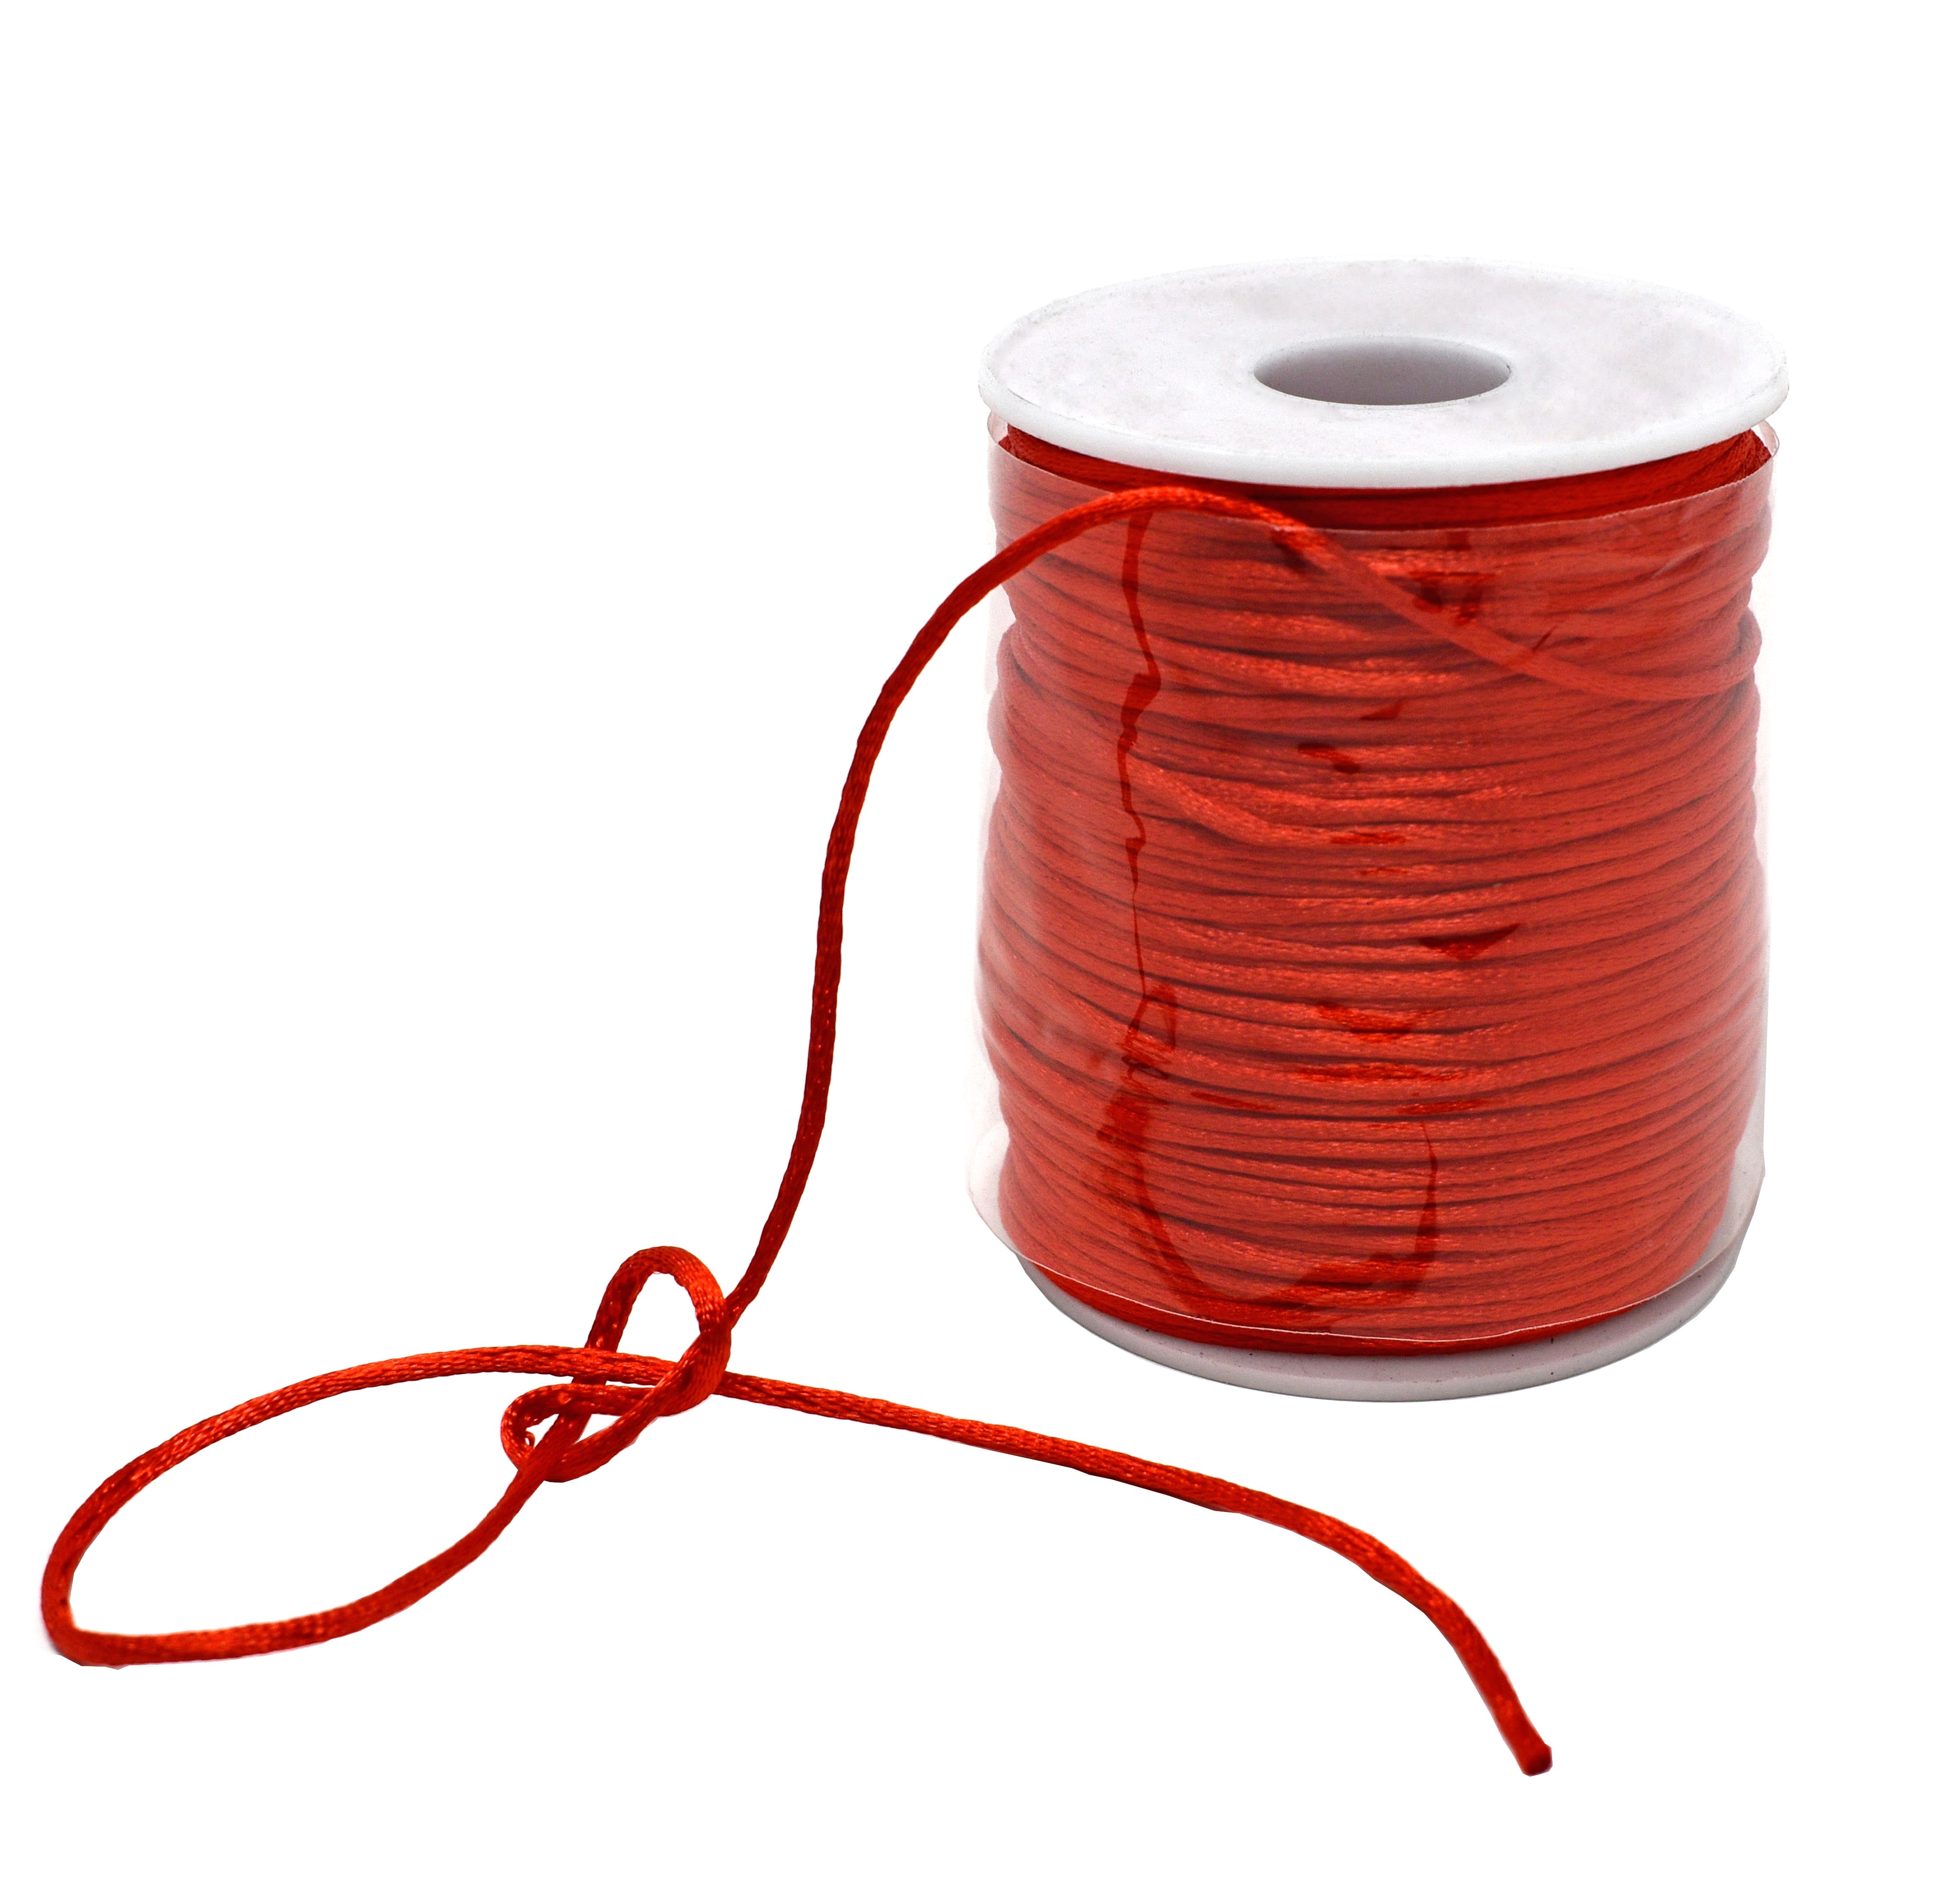 Uxcell Nylon Home DIY Craft Braided Chinese Knot Bracelet Cord String Rope 110 Yards Red